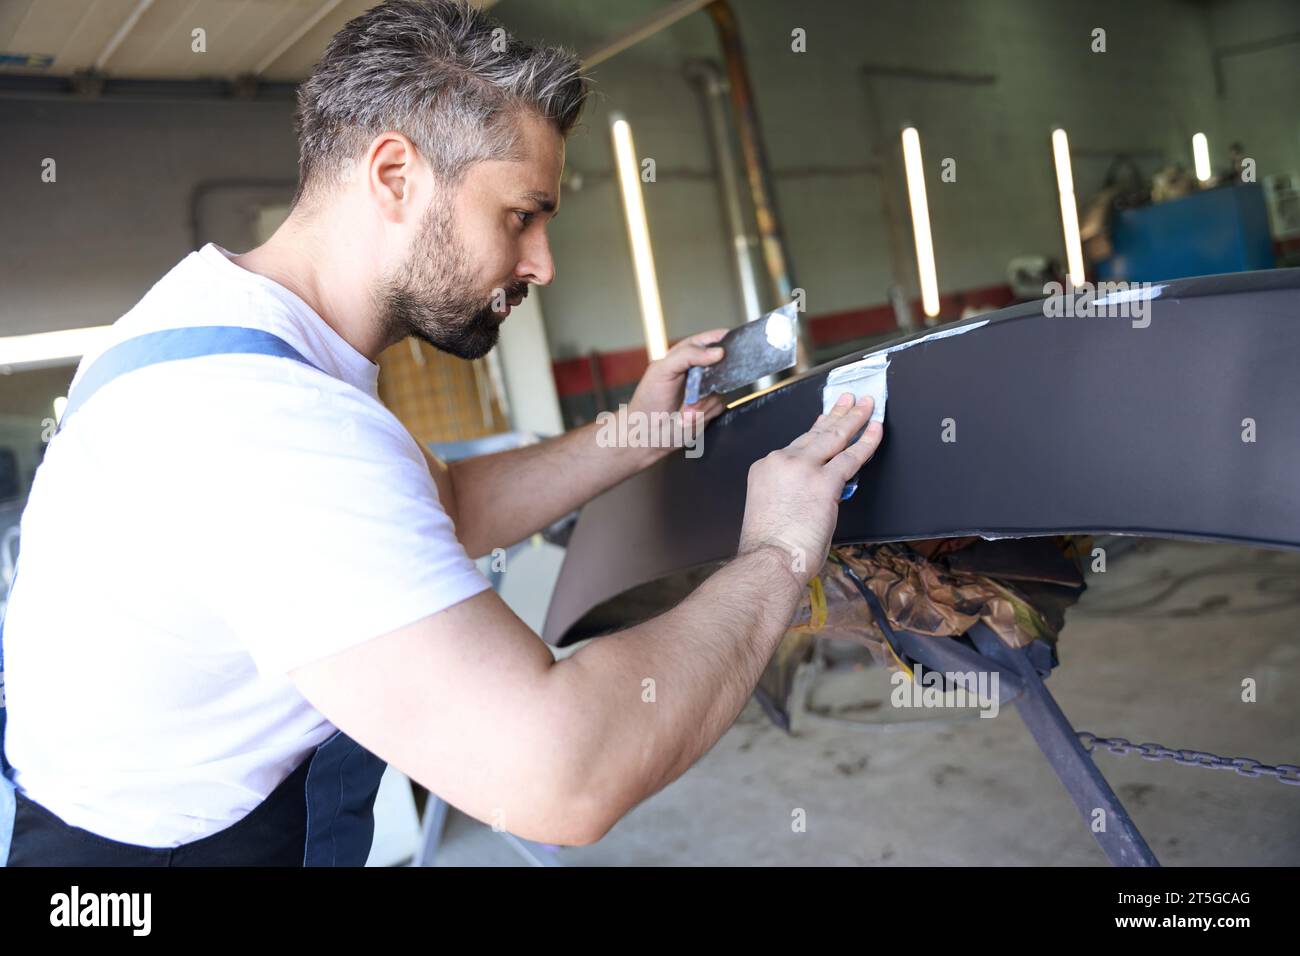 Focused car mechanic removing scratches from auto body part Stock Photo